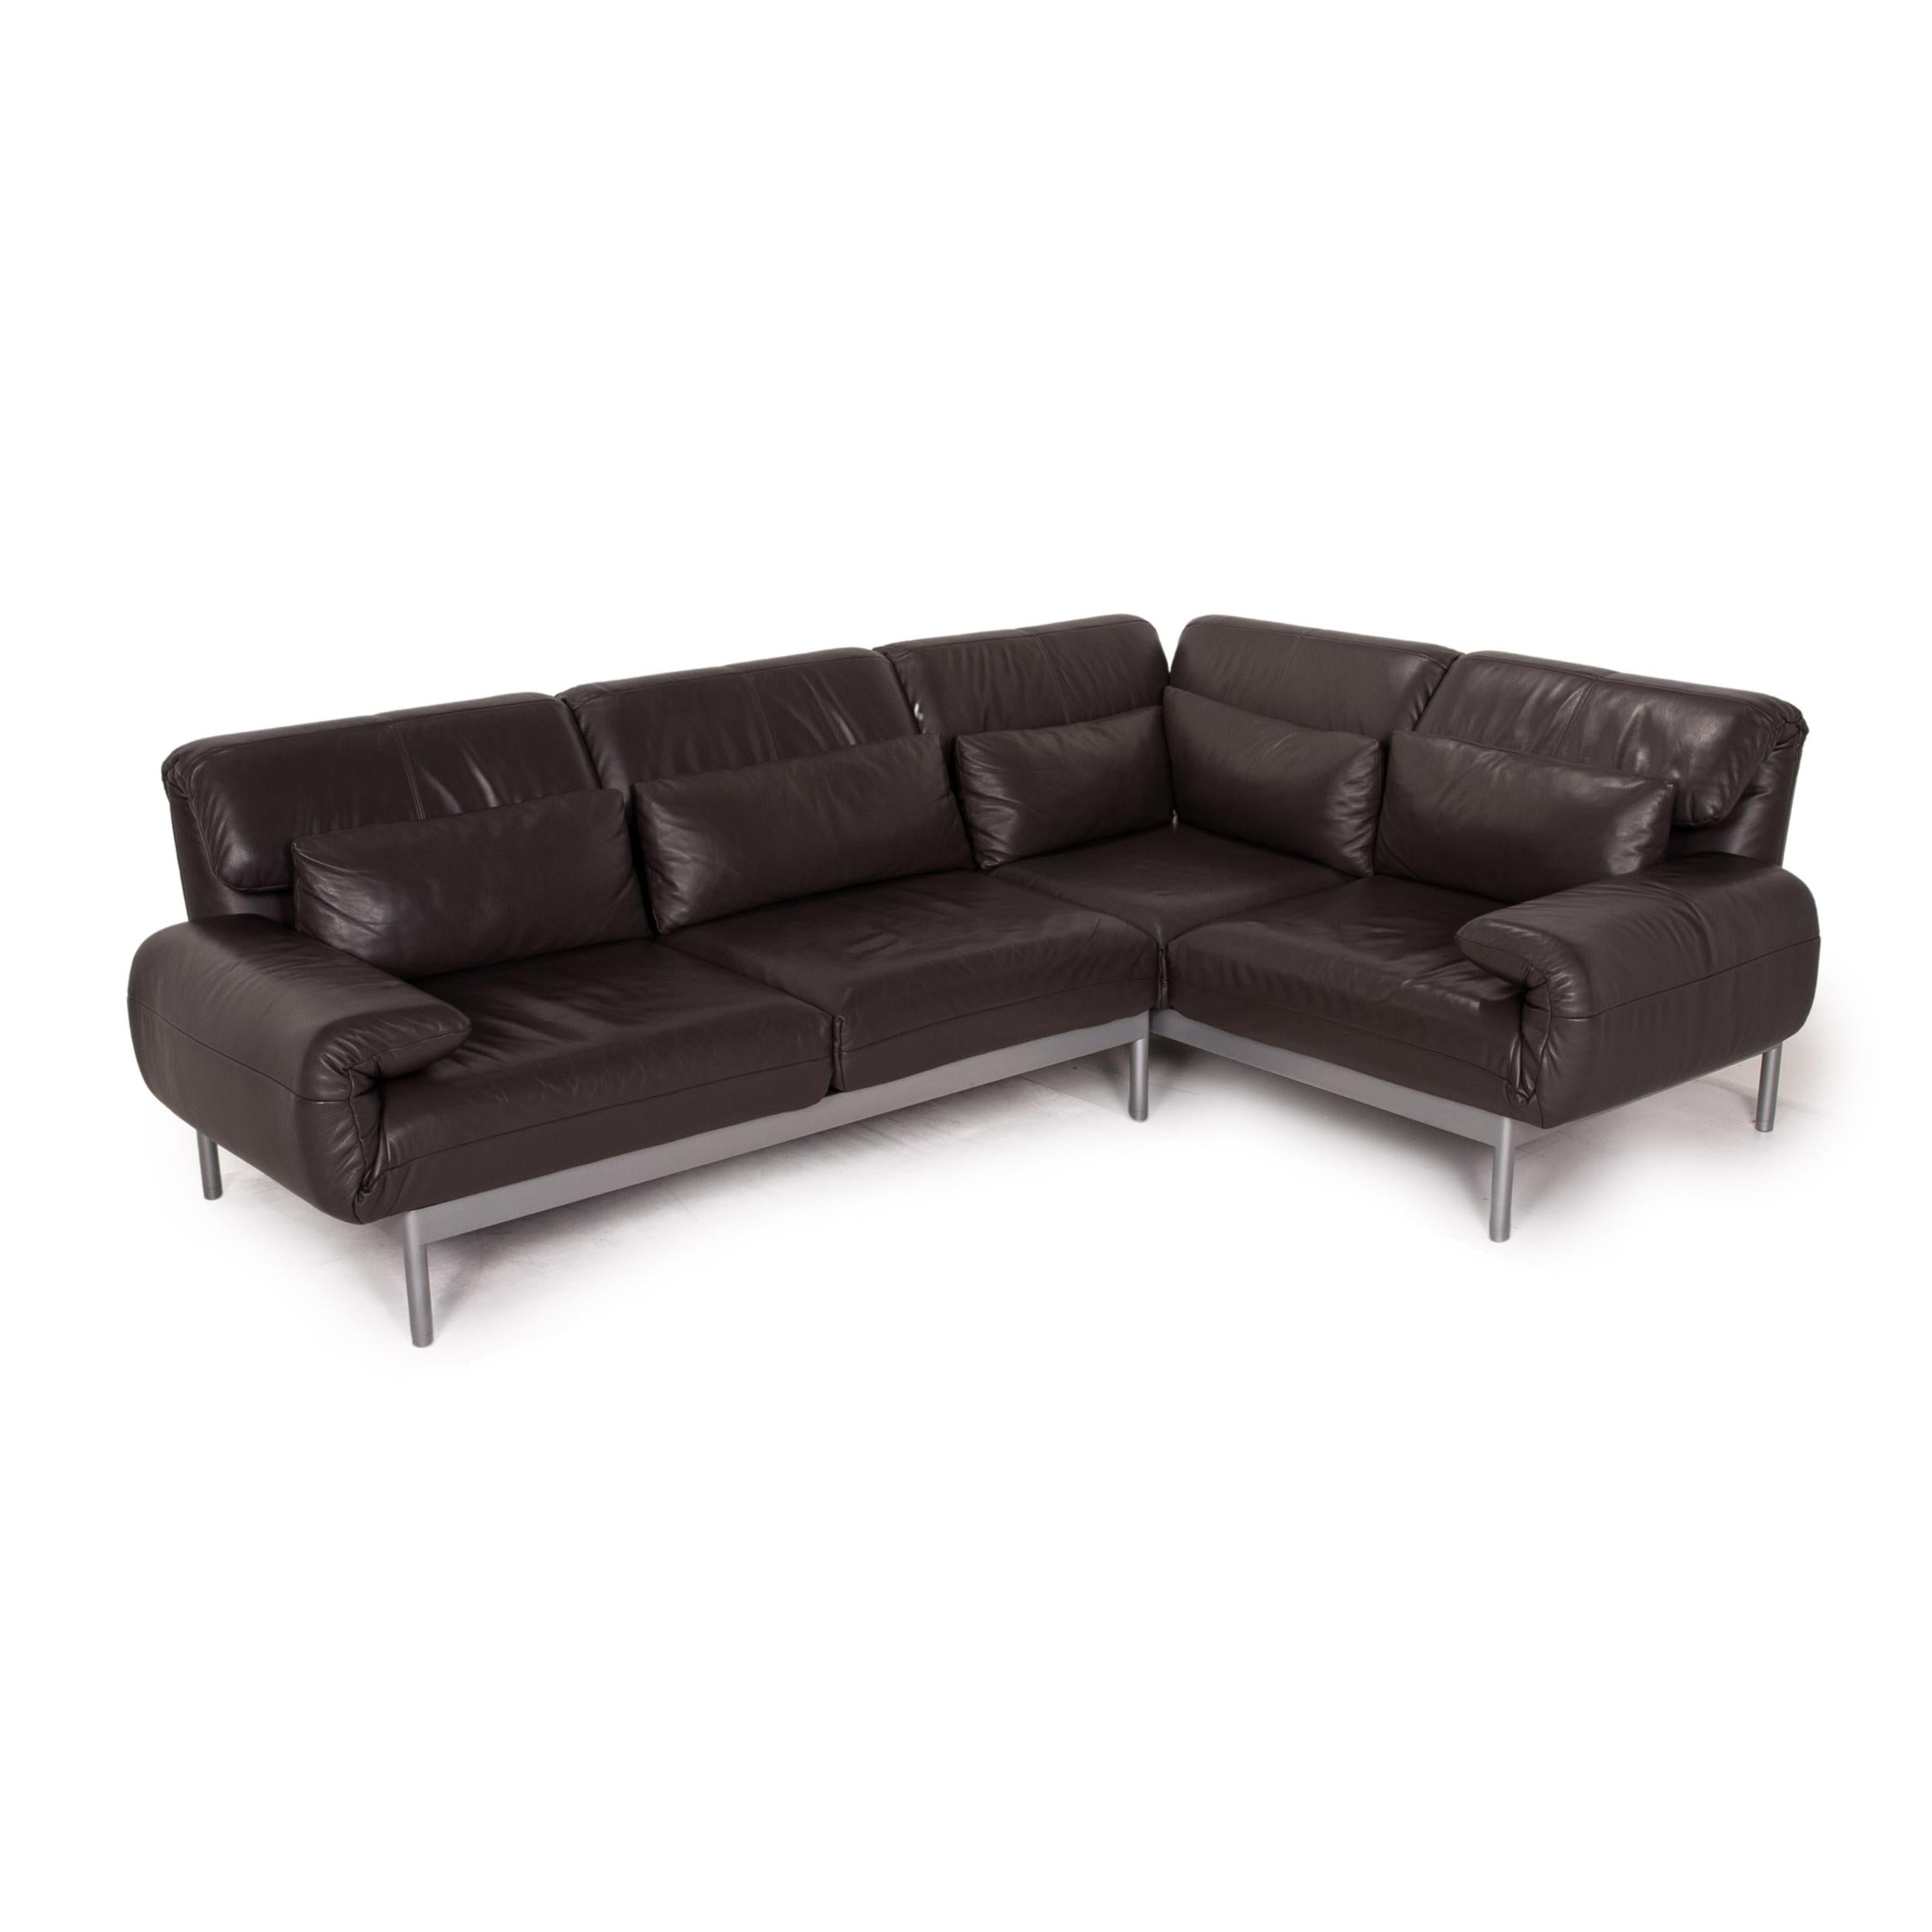 Rolf Benz Plura Leather Corner Sofa Brown Dark Brown Function Relax Function For Sale 4